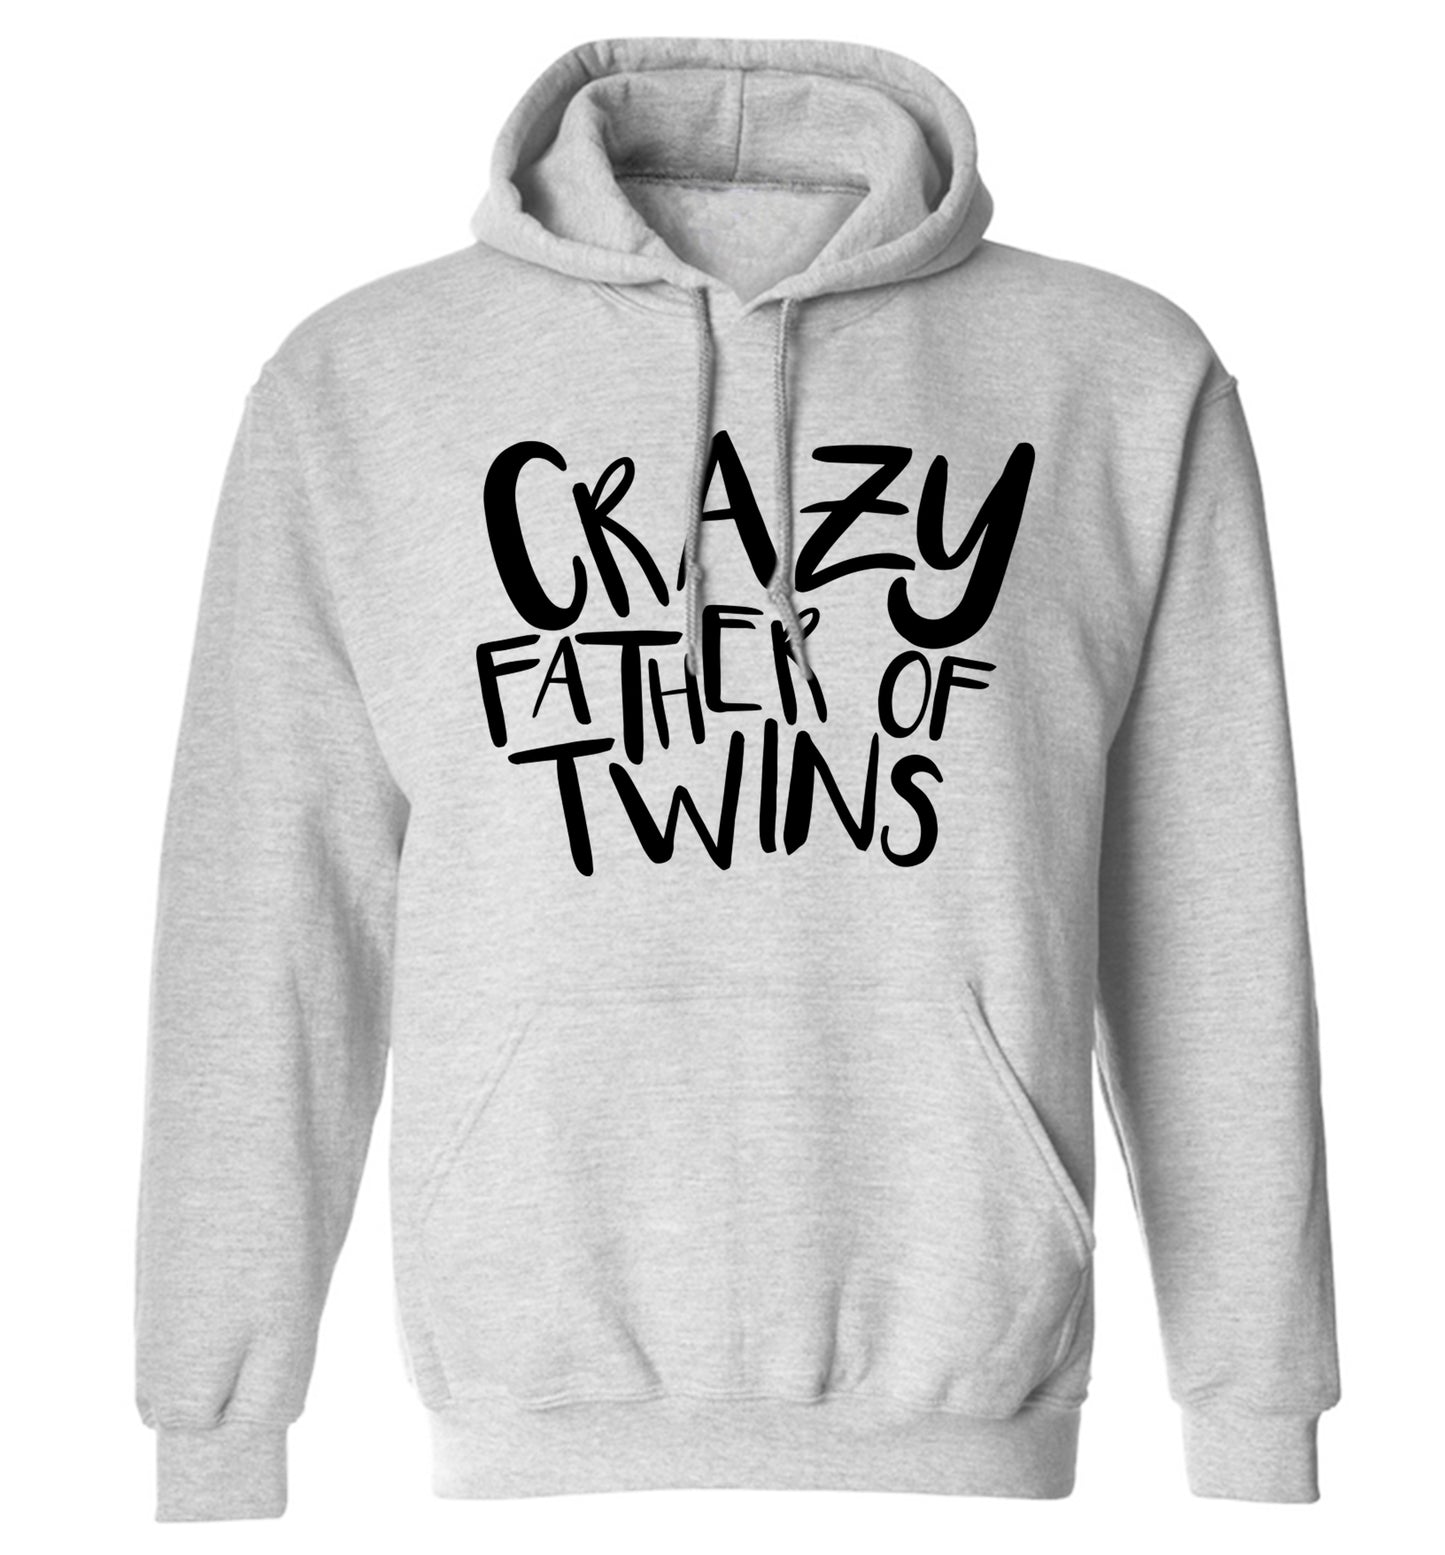 Crazy father of twins adults unisex grey hoodie 2XL